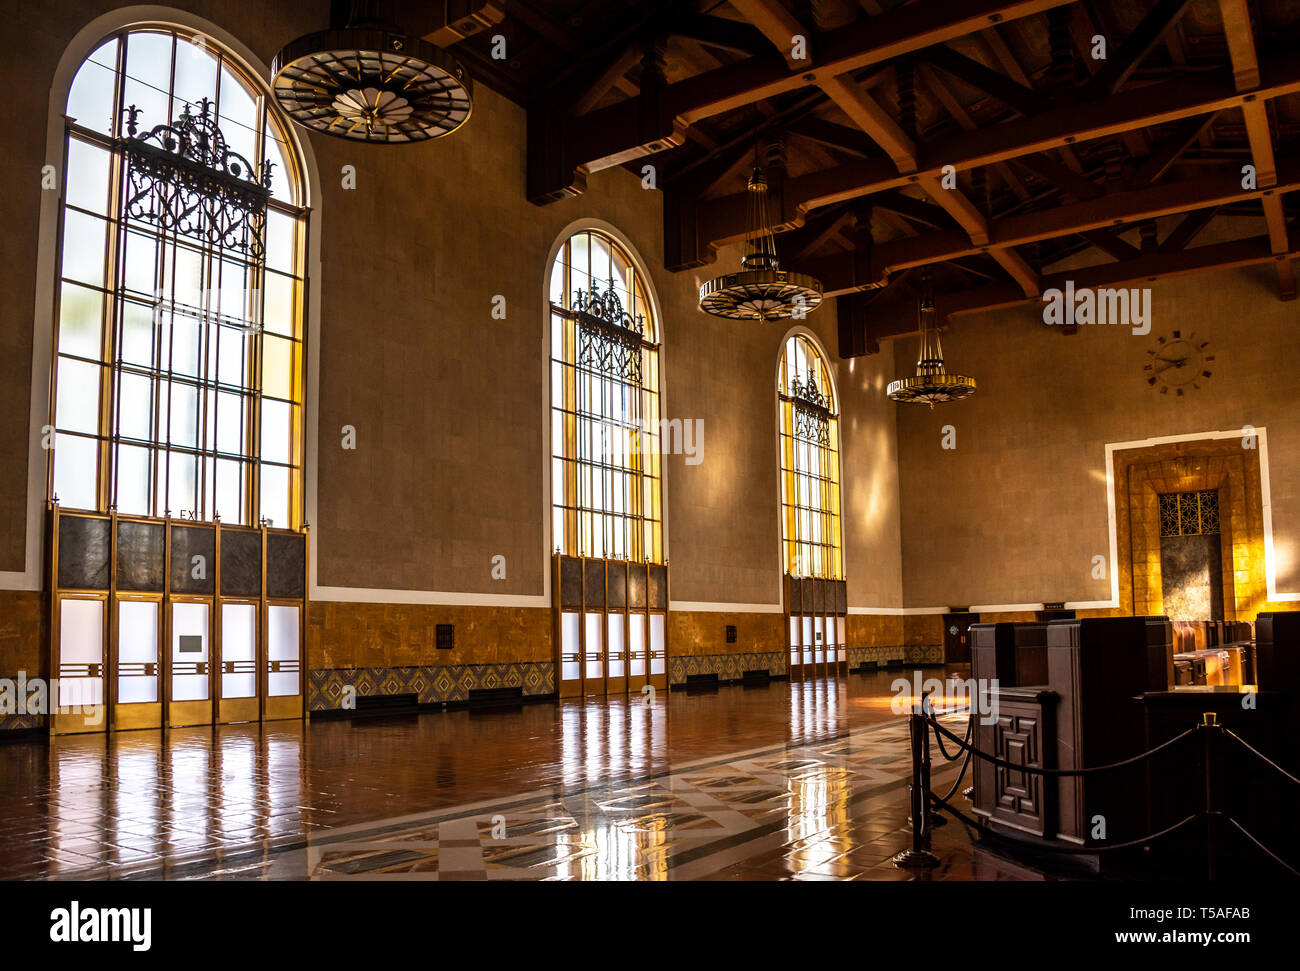 Inside historic Los Angeles Union Station with architectural details of tall Mission Revival windows and ceiling beams, with Art Deco light fixtures. Stock Photo